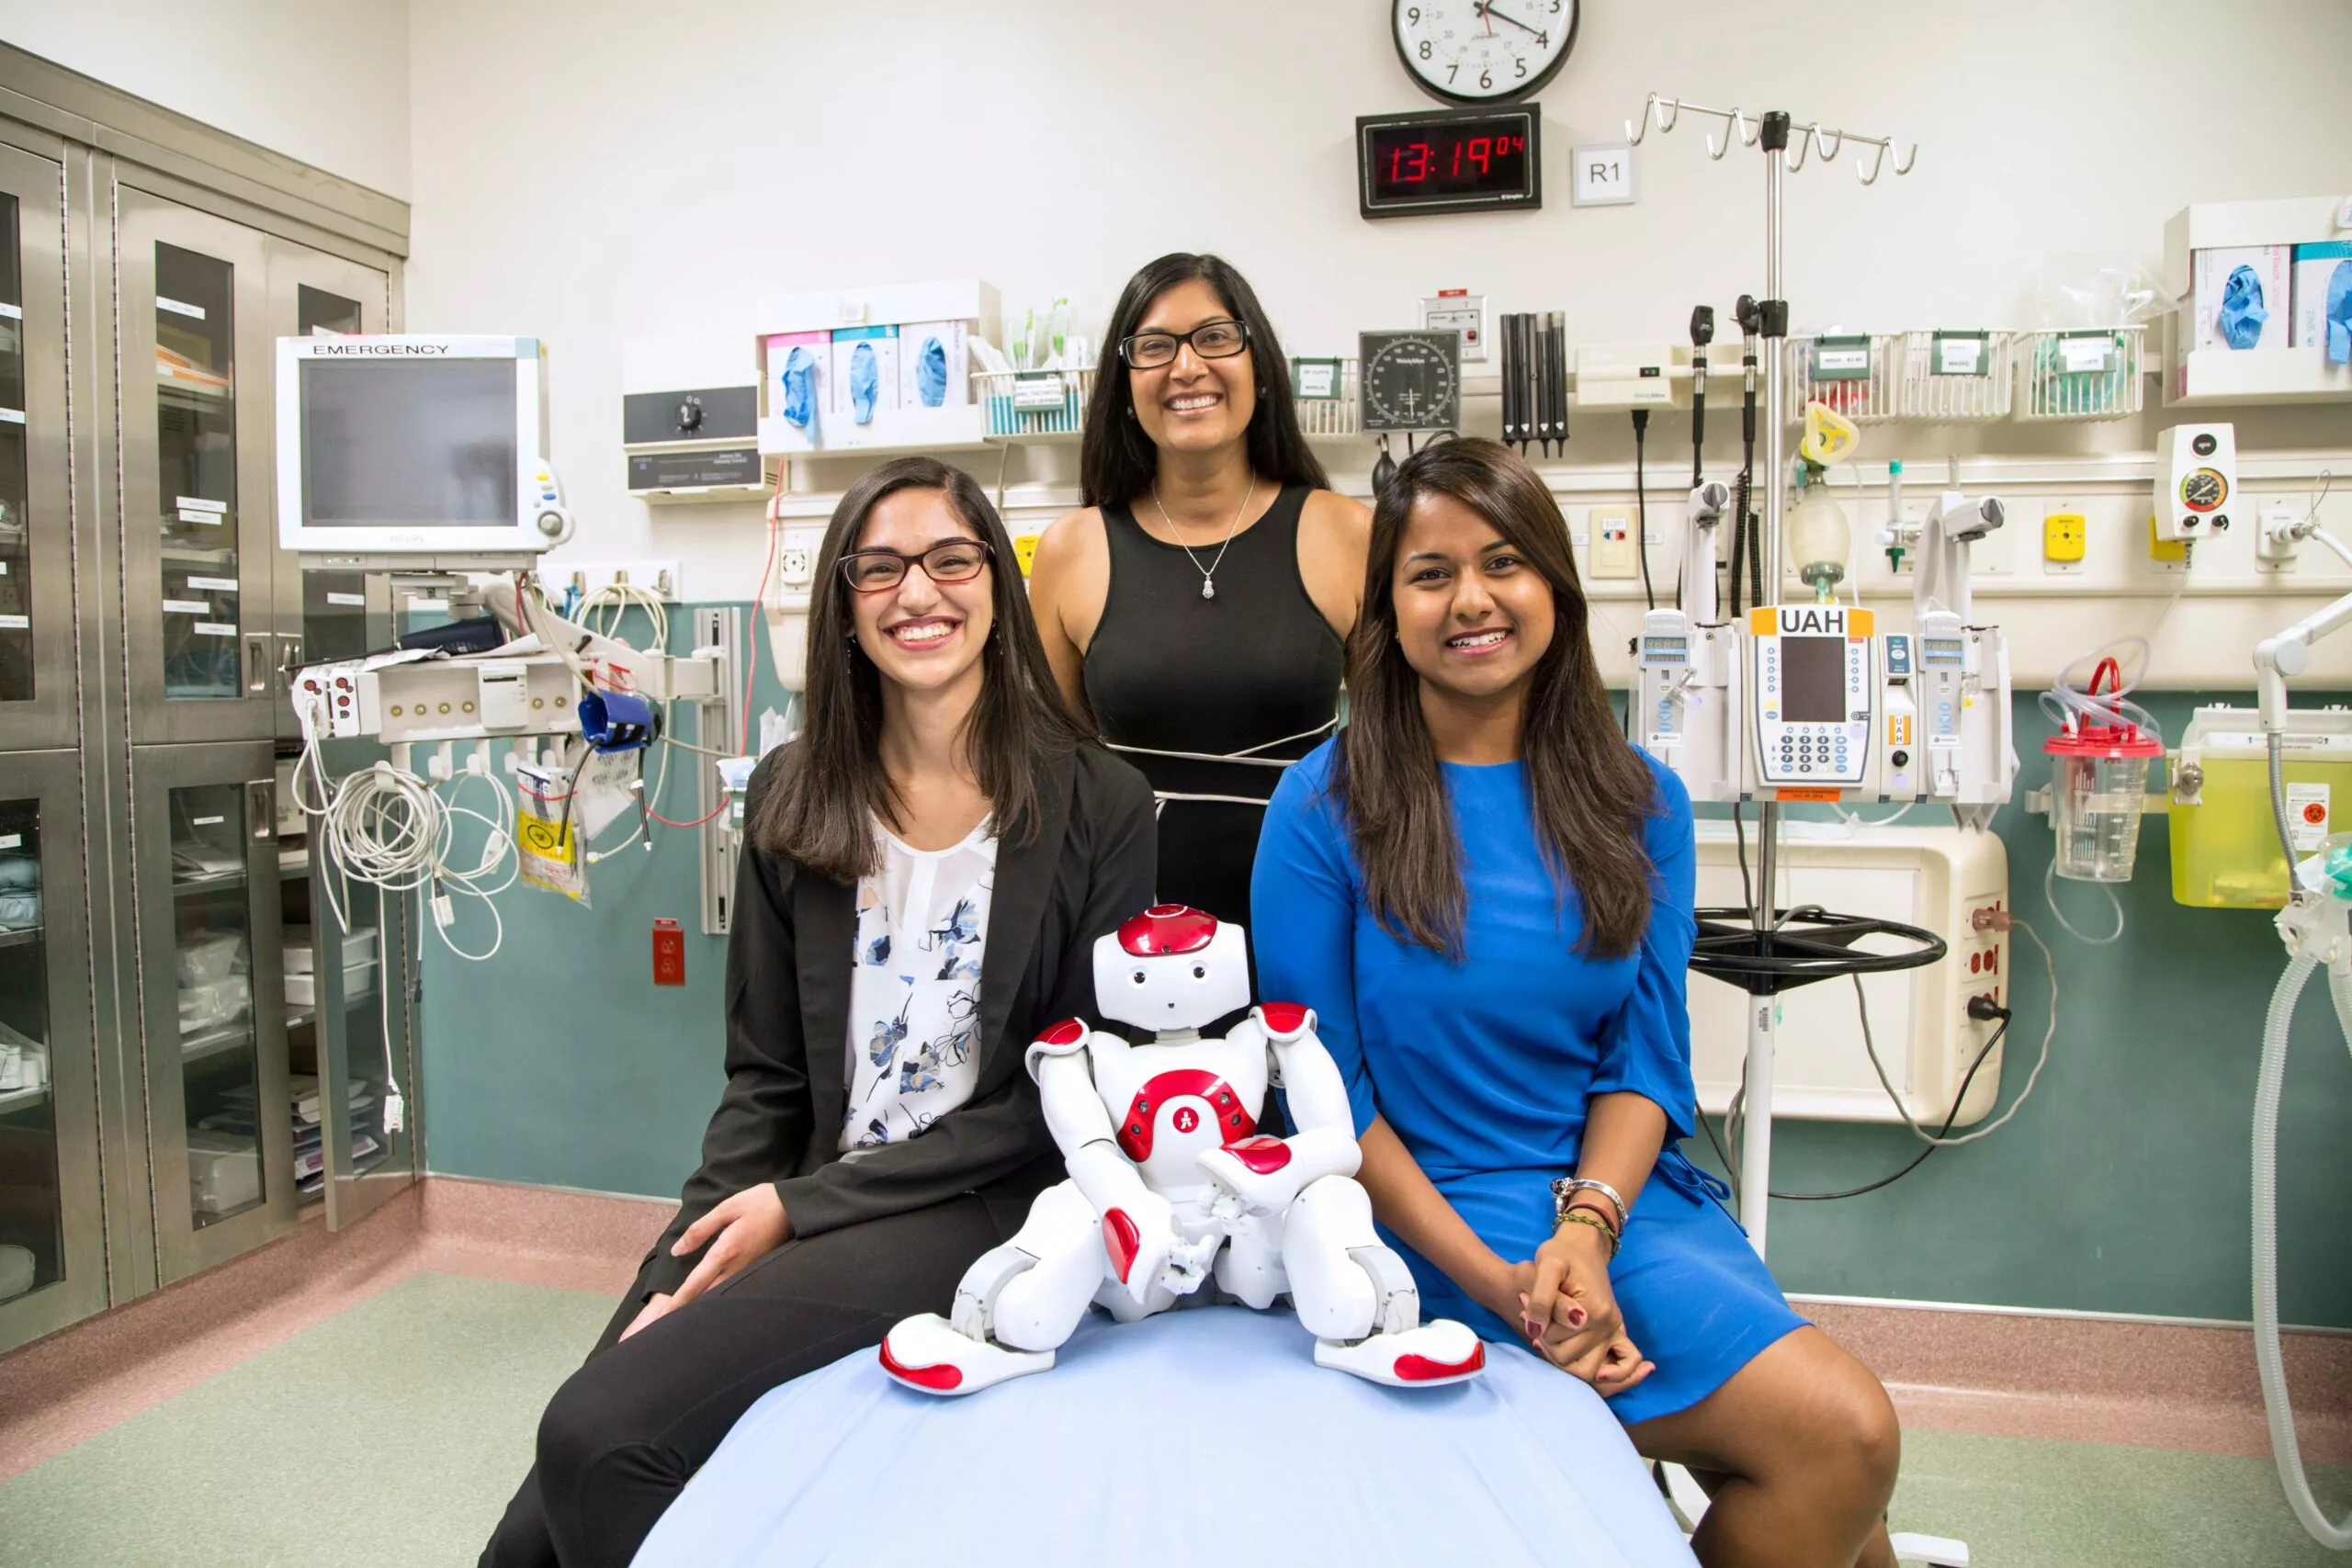 stollery staff medi team sitting on hospital bed with robot